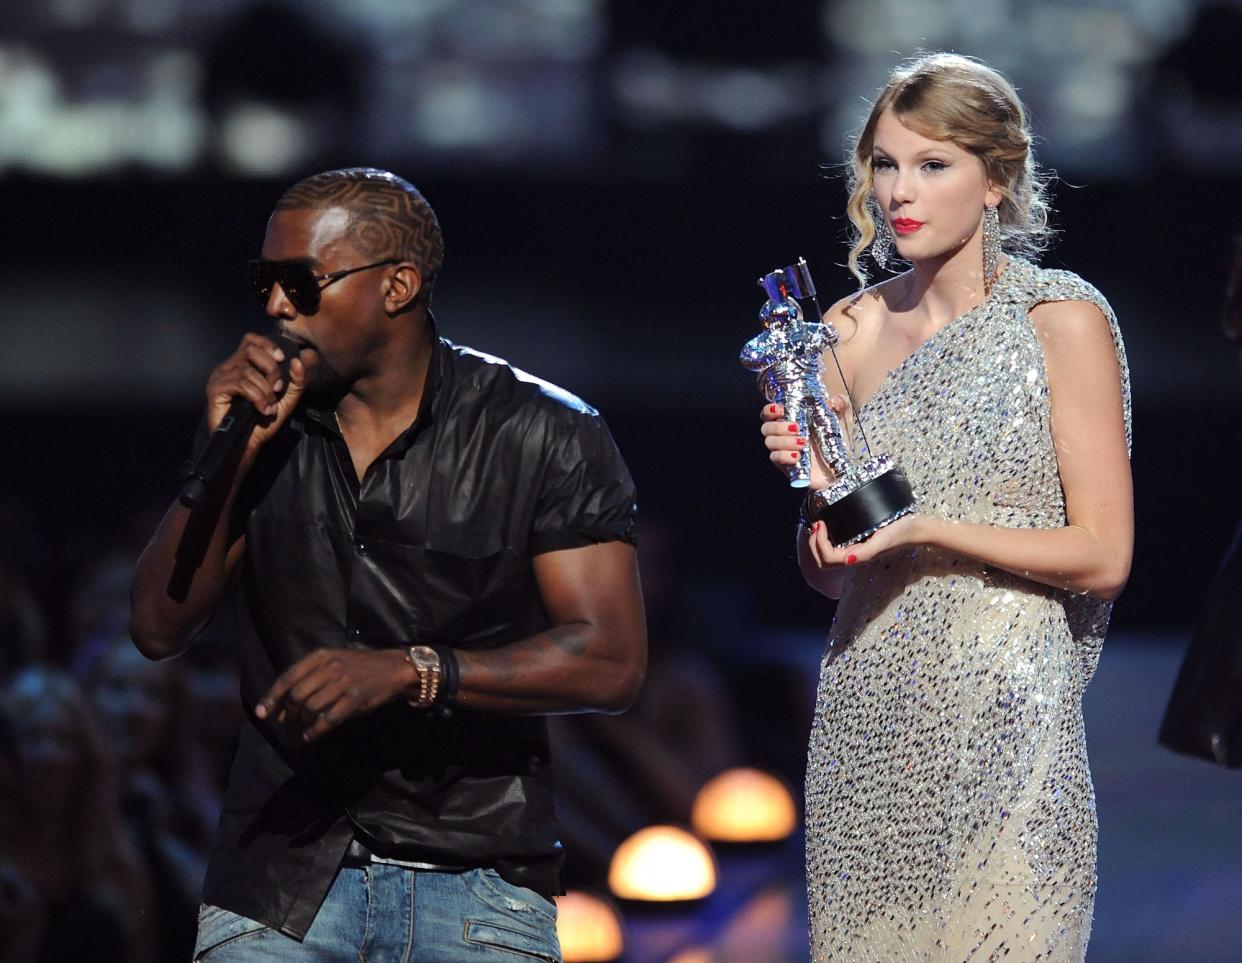 Kanye West takes the microphone from Taylor Swift and speaks onstage during the 2009 MTV Video Music Awards at Radio City Music Hall on September 13, 2009 in New York City.